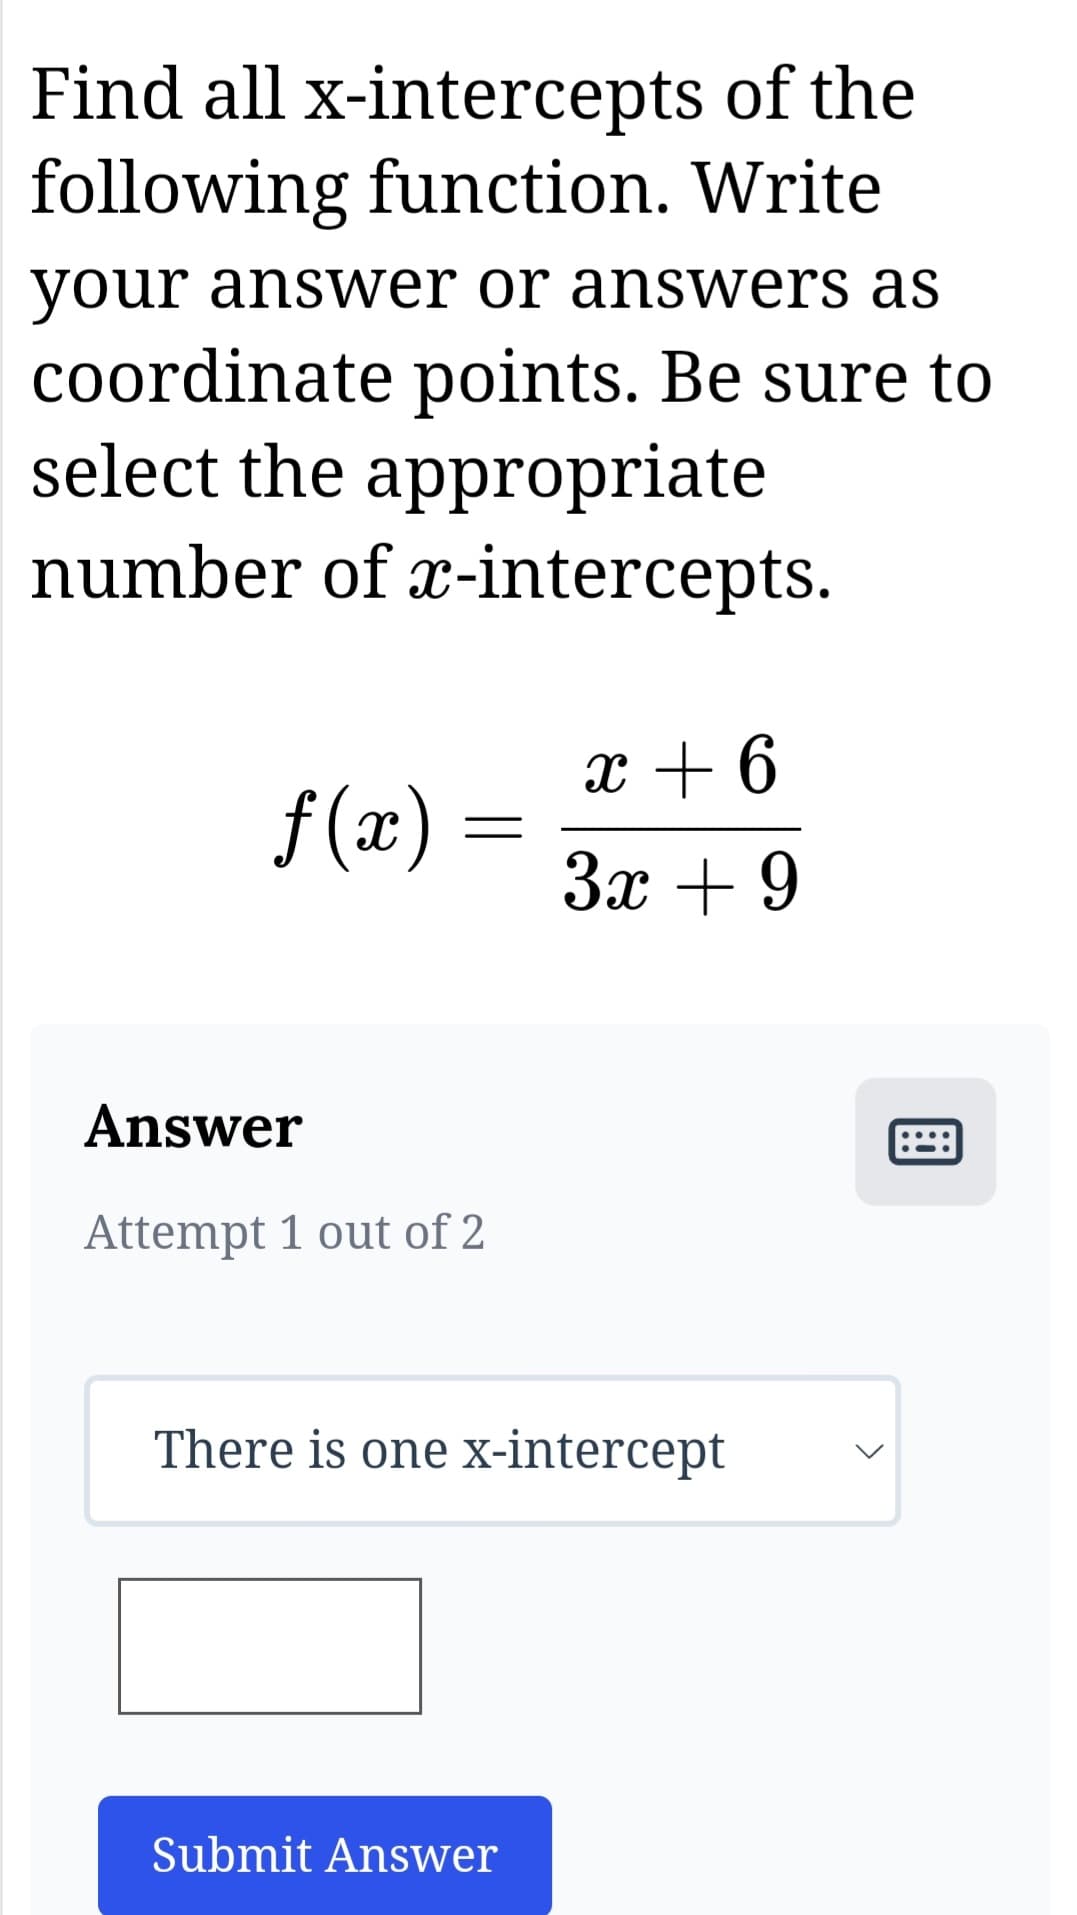 Find all x-intercepts of the
following function. Write
your answer or answers as
coordinate points. Be sure to
select the appropriate
number of x-intercepts.
f(x)
Answer
Attempt 1 out of 2
x + 6
3x +9
There is one x-intercept
Submit Answer